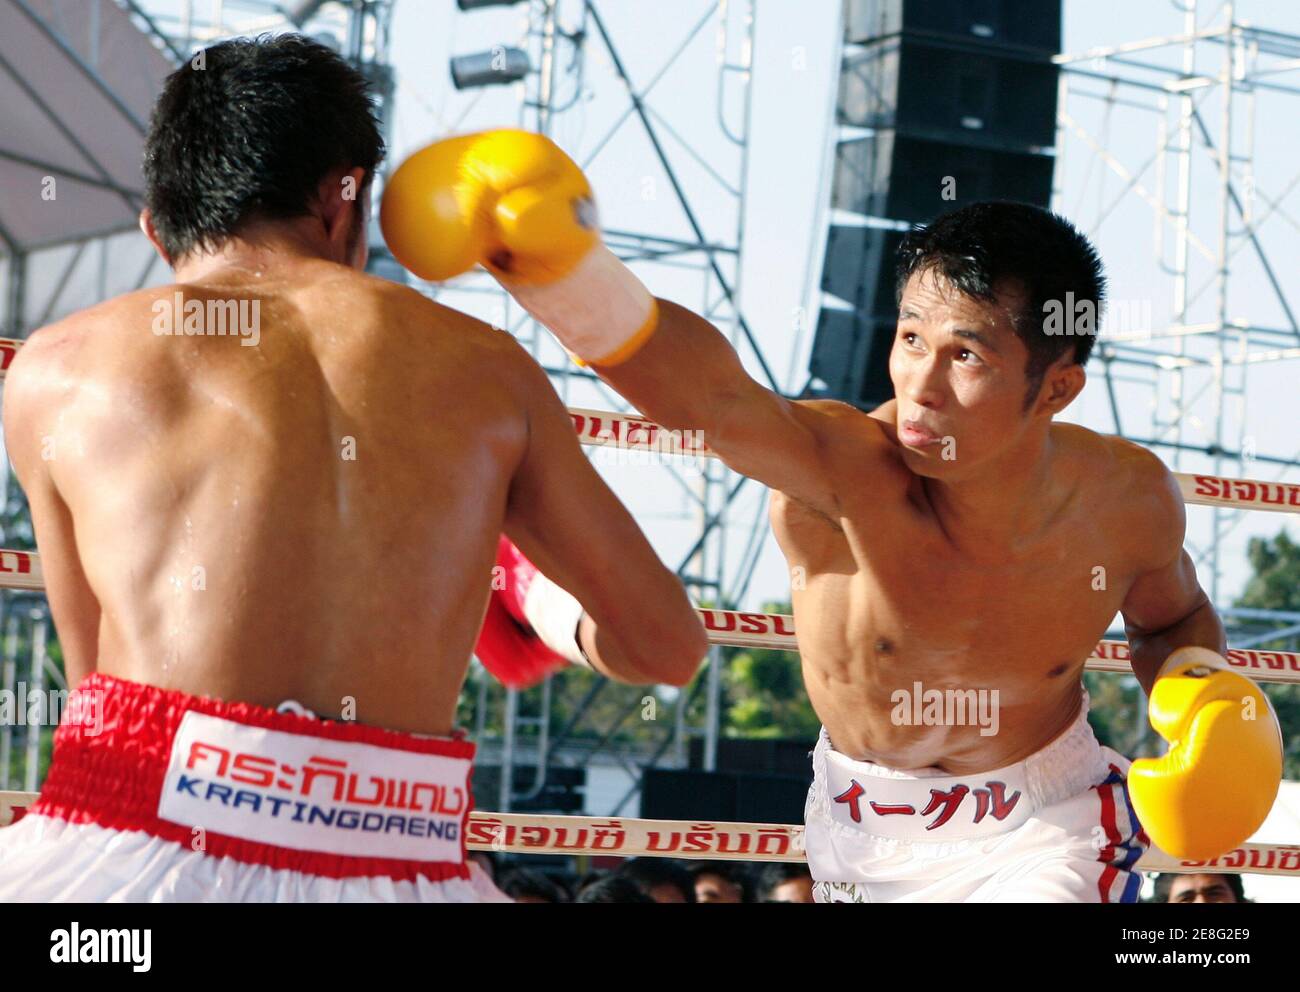 WBC strawweight champion Eagle Kyowa lands a punch on the face of Thai challenger Oledong Sithsanerchai during their WBC strawweight title bout in Bangkok November 29, 2007. Oledong won the match.   REUTERS/Chaiwat Subprasom (THAILAND) Stock Photo